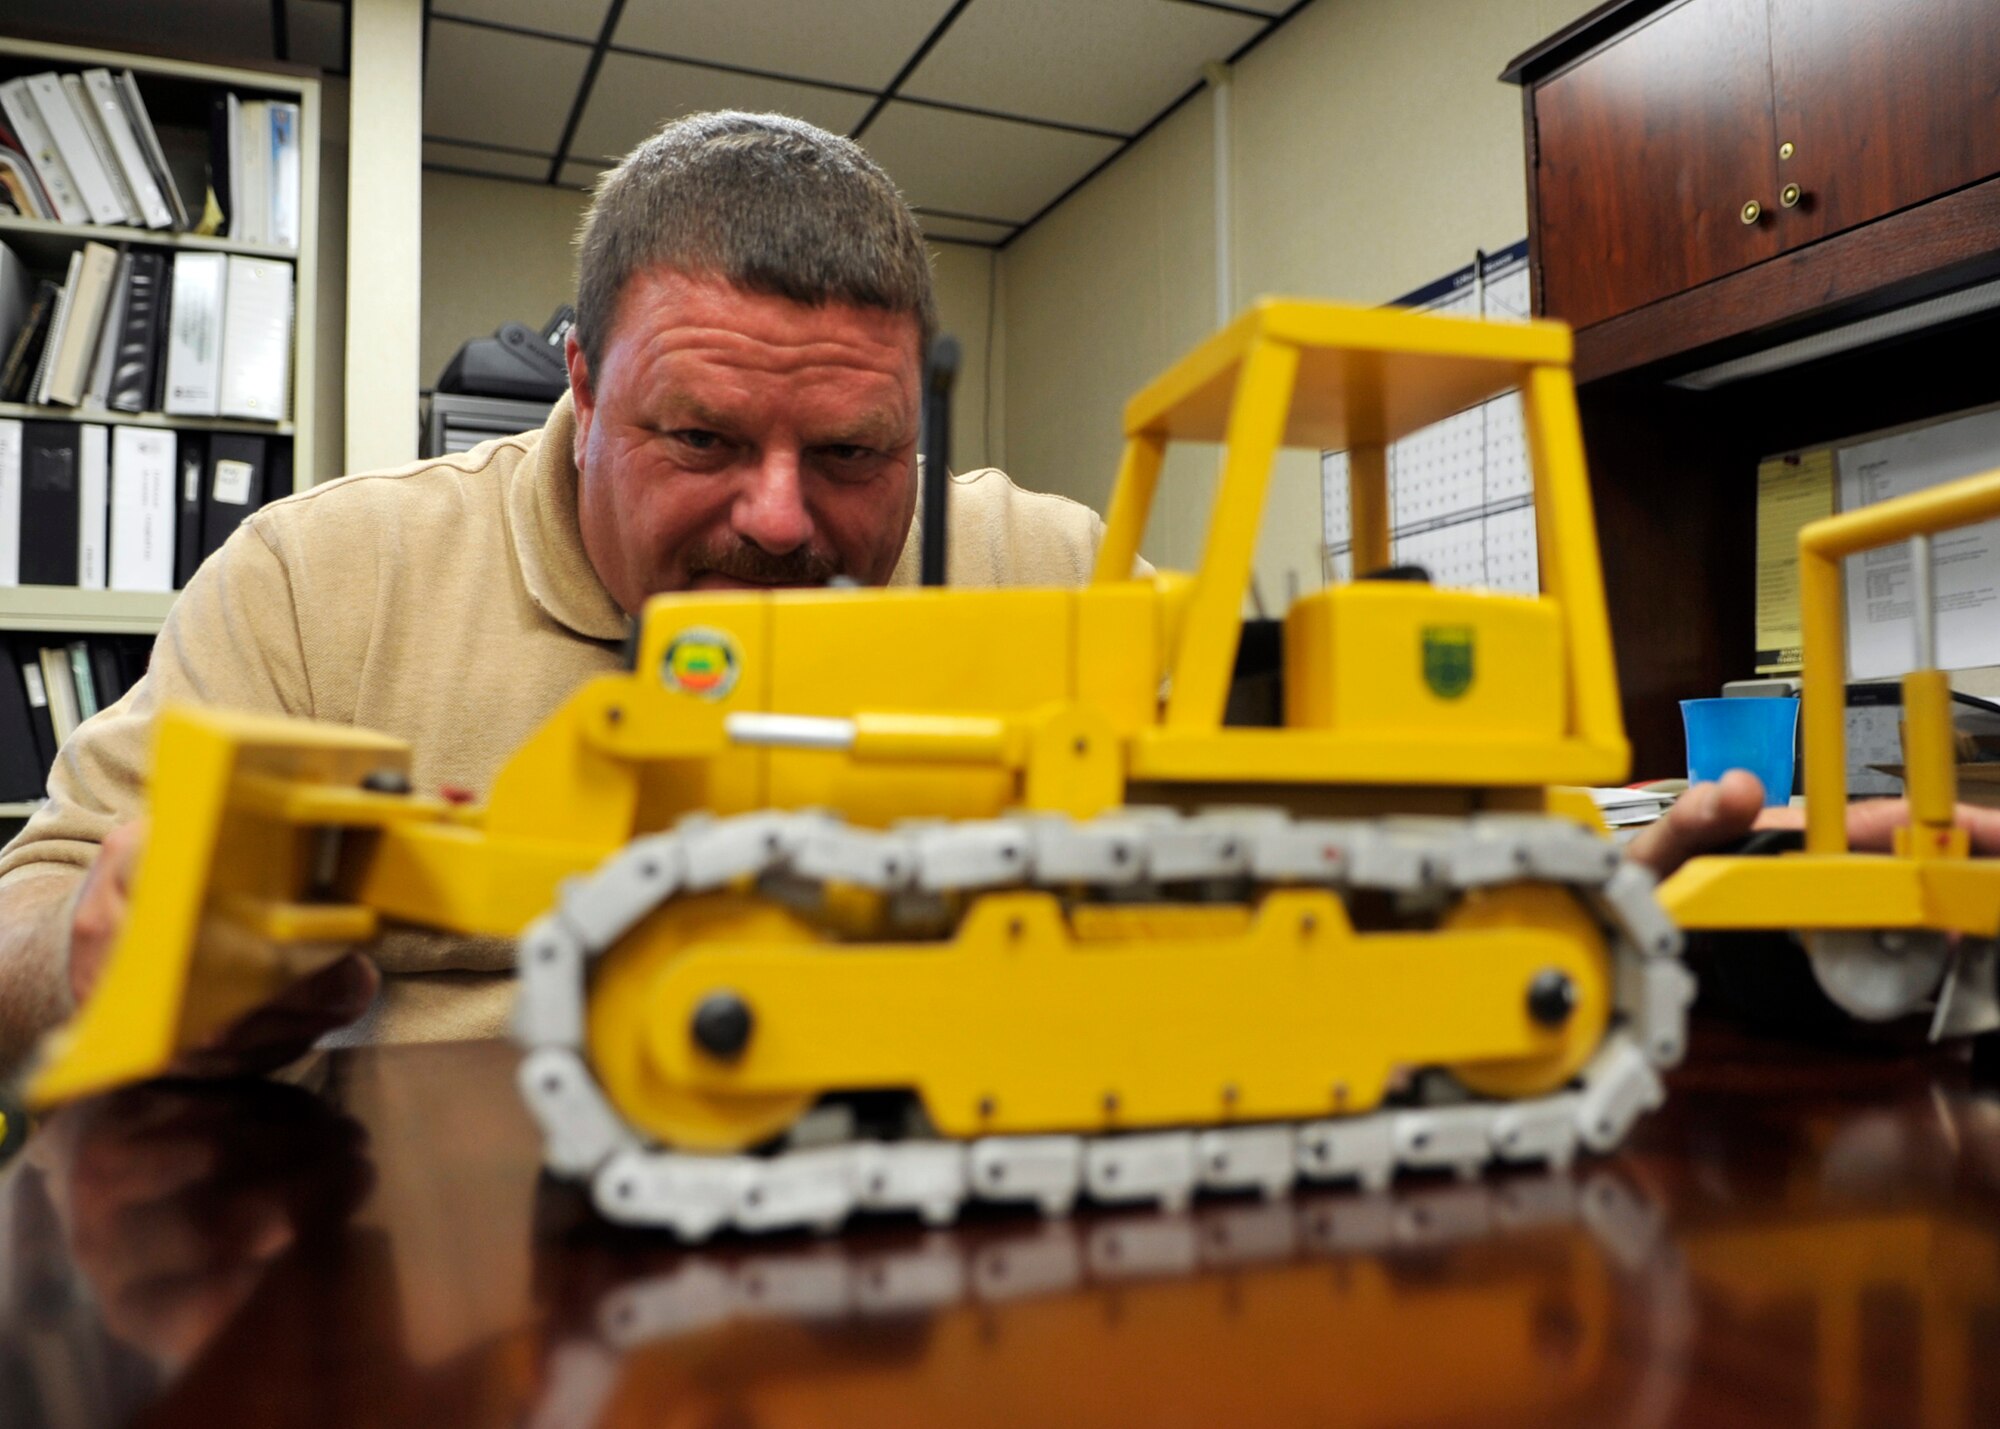 Richard Turner, a forest technician assigned to the 325th Civil Engineer Squadron Natural Resources, inspects a home-made wooden toy at the Natural Resources building June 14, 2016. Turner was chosen as the ‘Unsung Hero’ as part of Tyndall Air Force Base’s squadron of the week program, and one of his hobbies includes woodworking. (U.S. Air Force photo by Senior Airman Sergio A. Gamboa/Released)